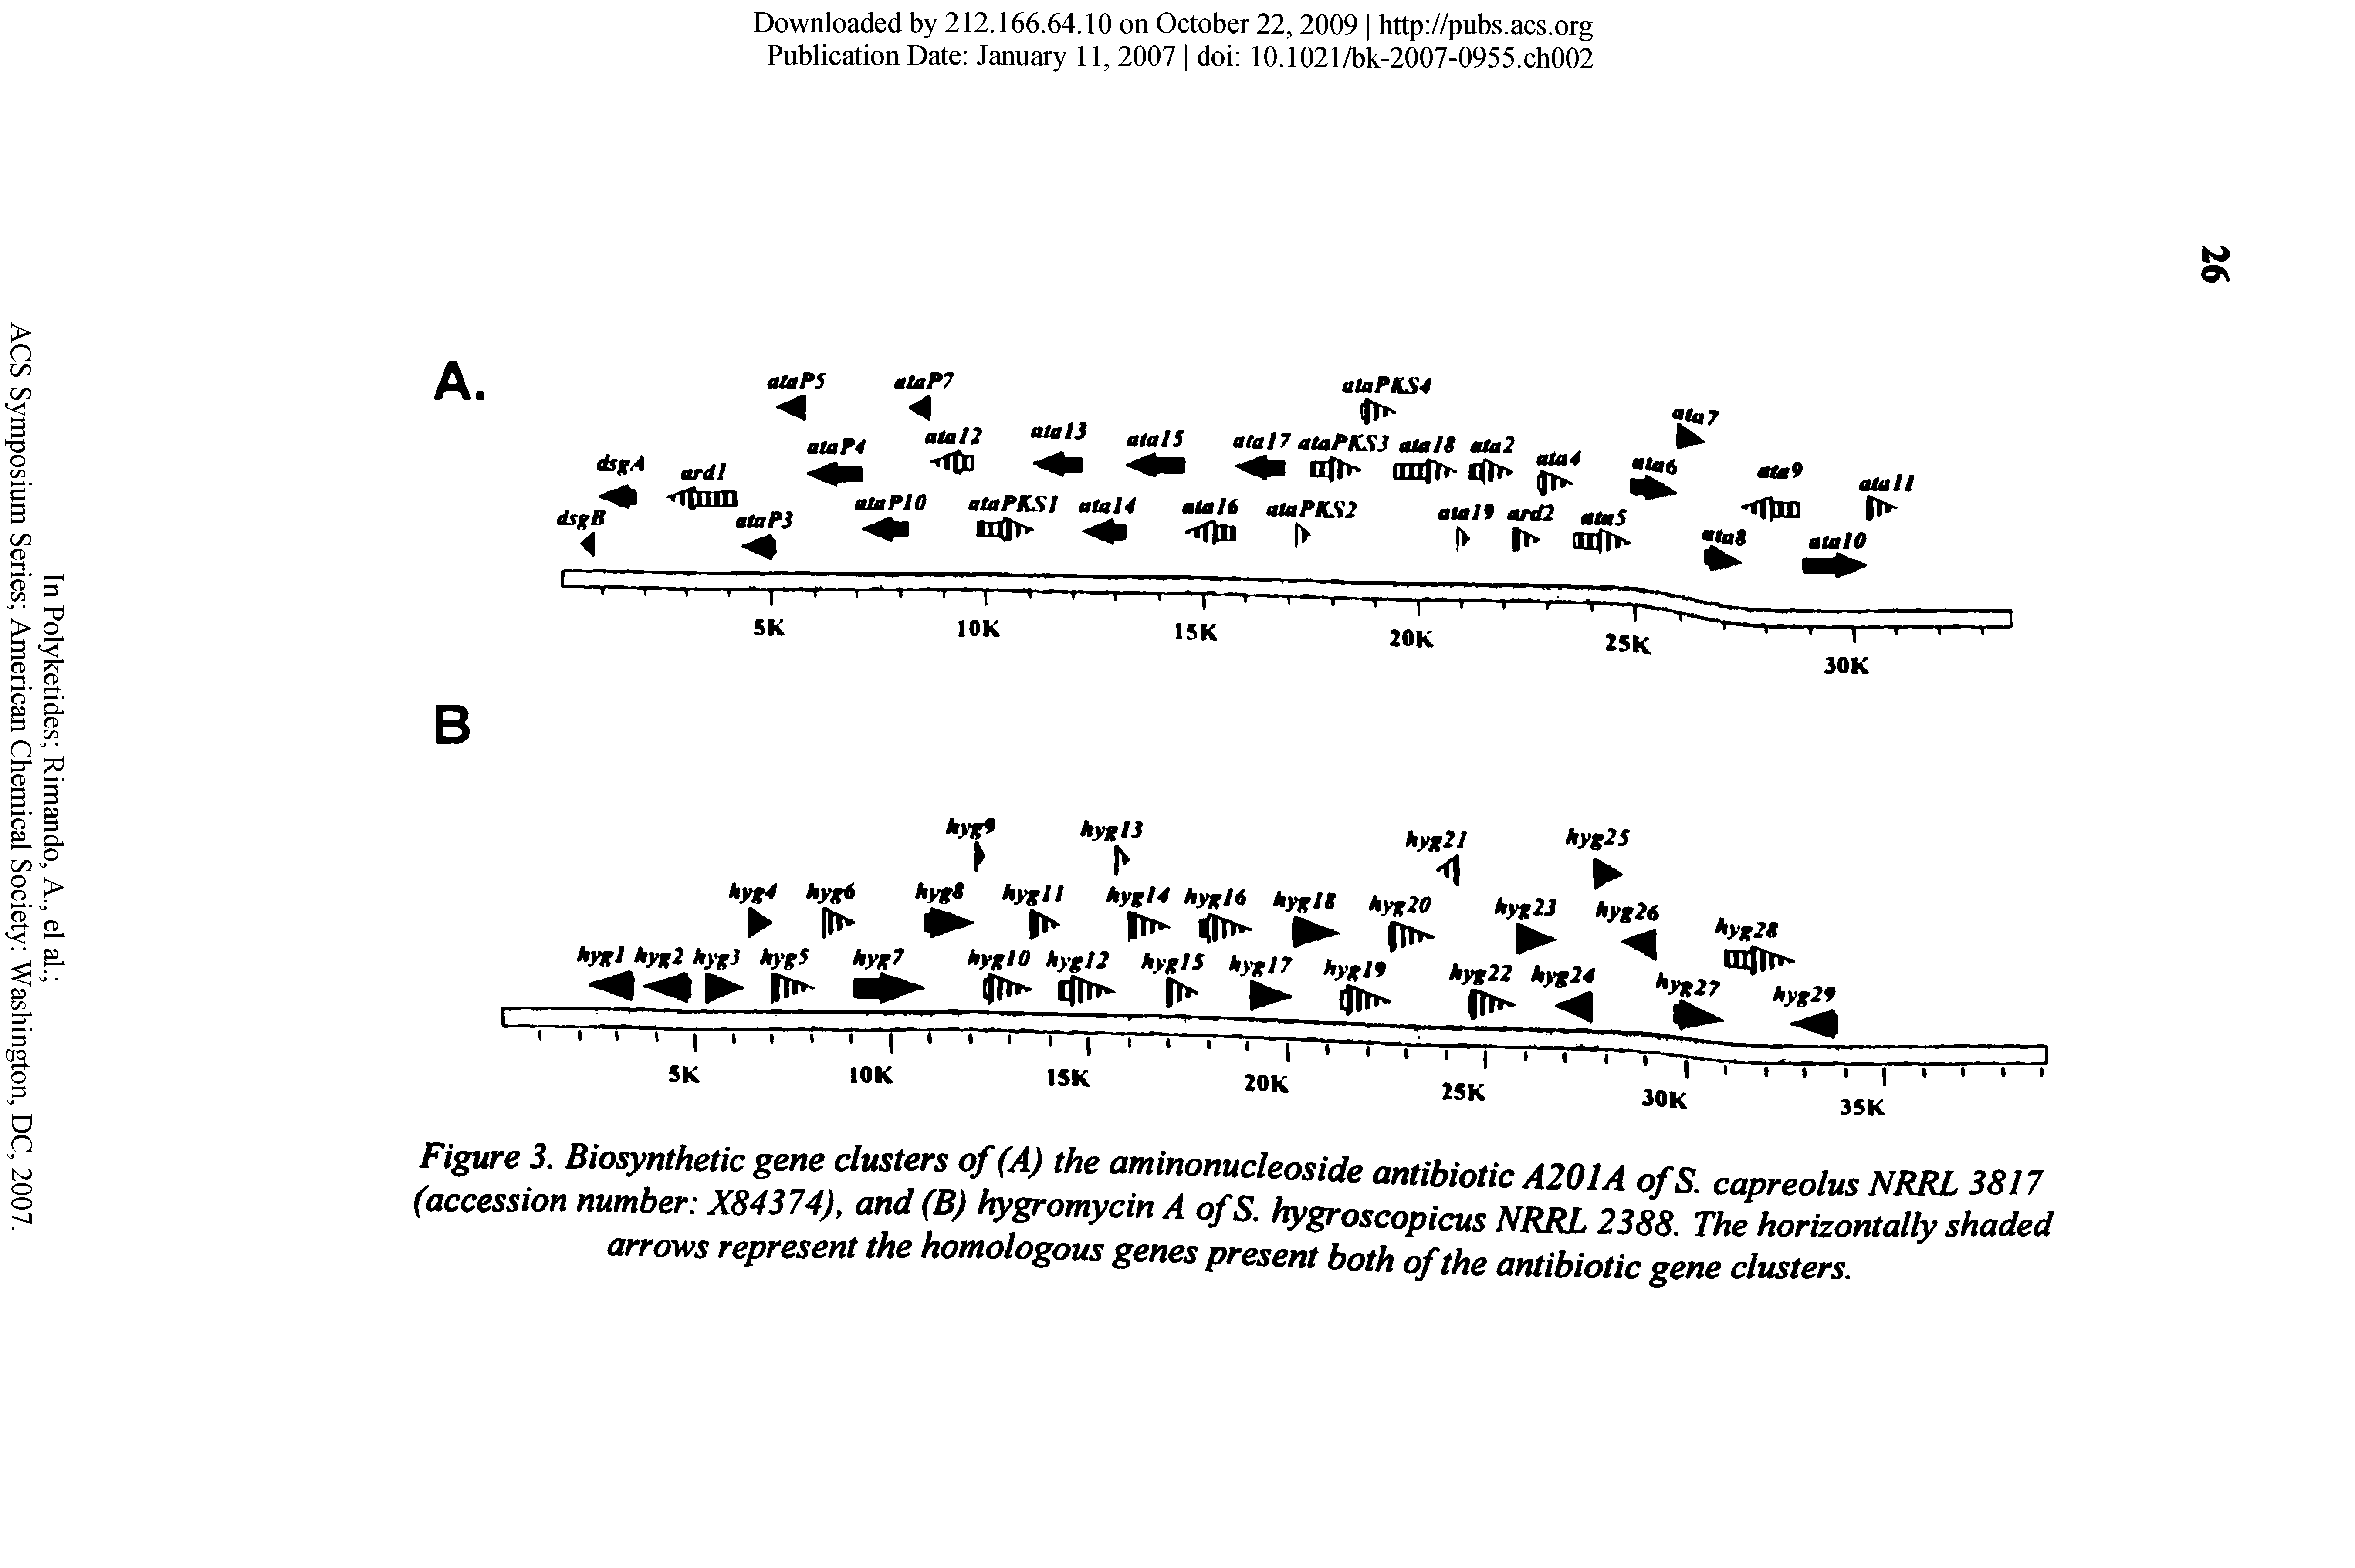 Figure 3, Biosynthetic gene clusters of (A) the aminonucleoside antibiotic A201A ofS. capreolus NRRL 3817 (accession number X84374), and (B) hygromycin A ofS. hygroscopicus NRRL 2388. The horizontally shaded arrows represent the homologous genes present both of the antibiotic gene clusters.